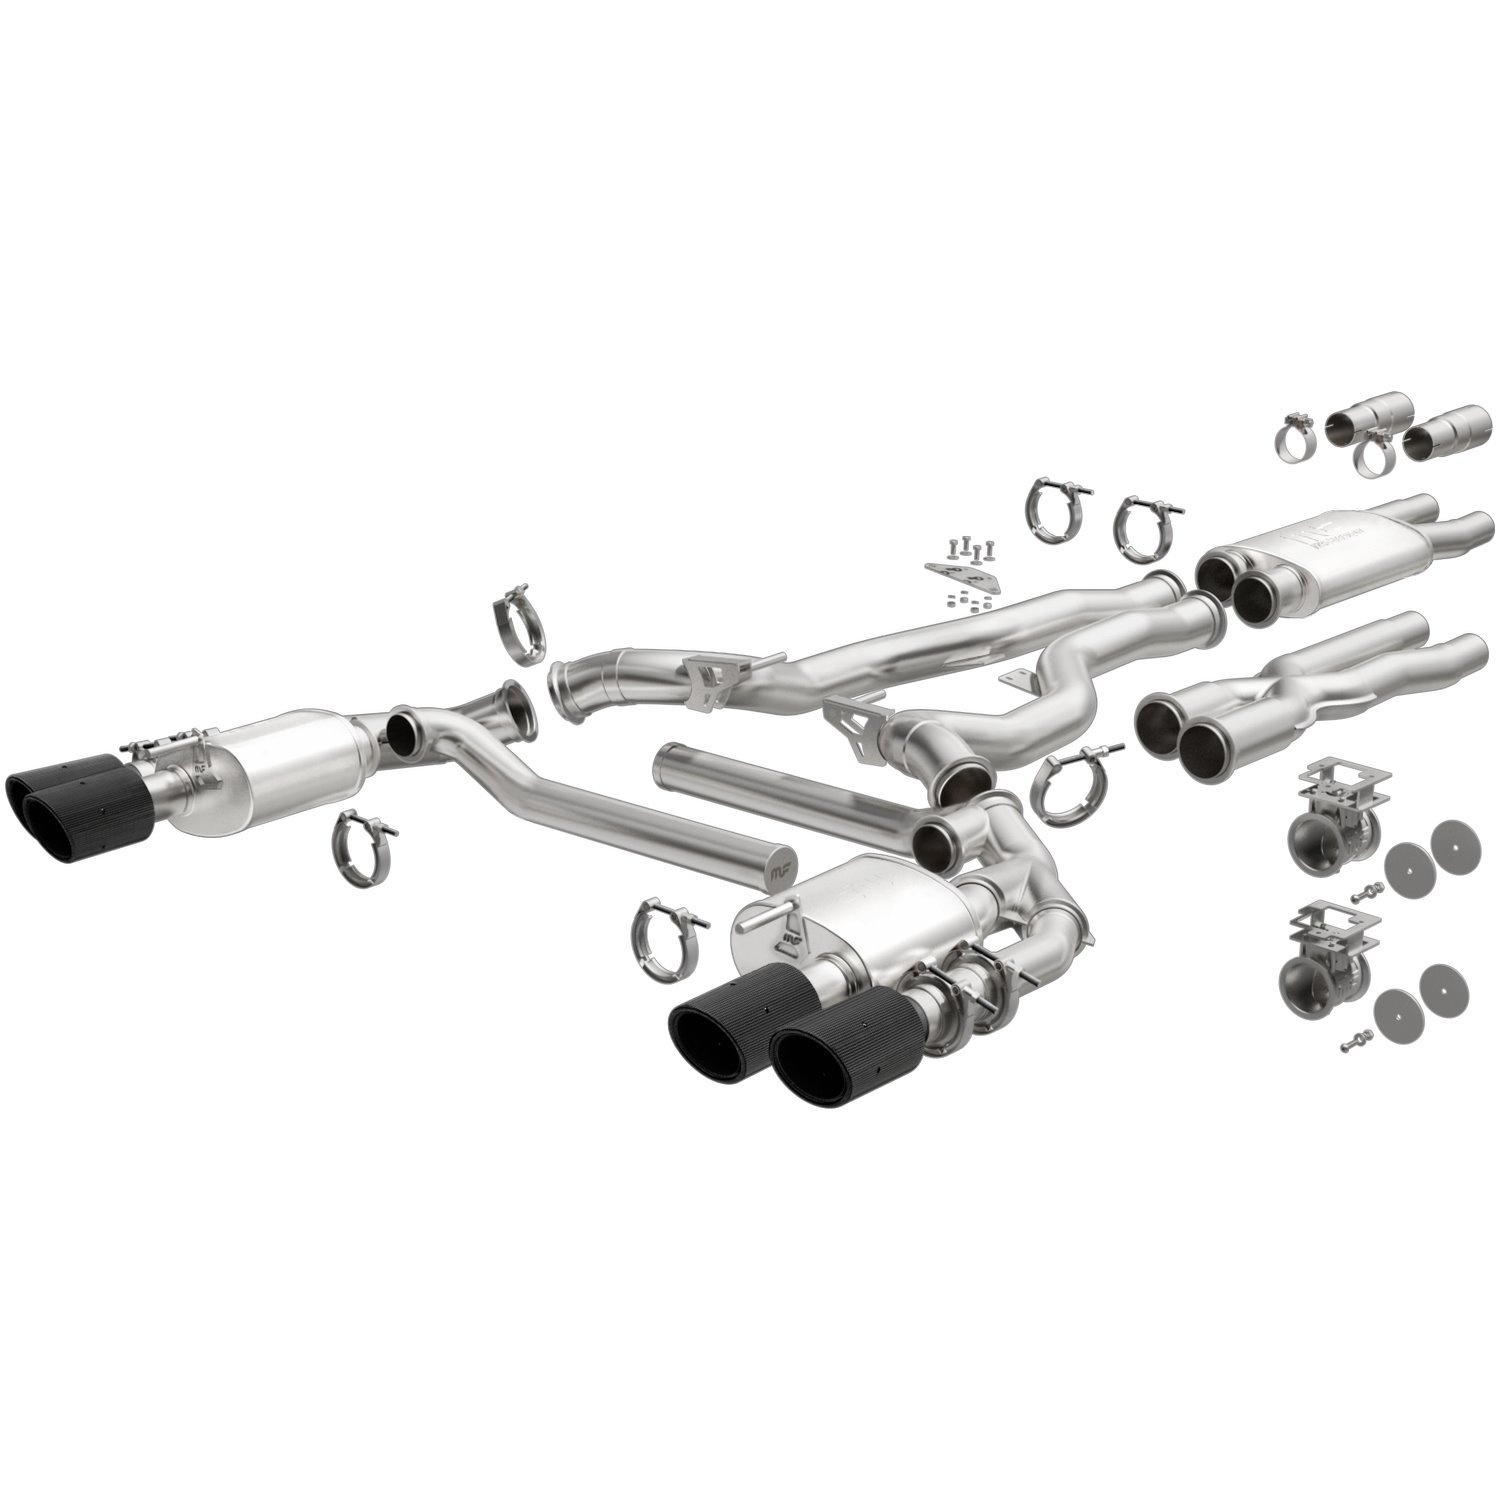 xMOD Series Cat-Back Exhaust System Fits Select Late-Model Mustang 5.0L V8